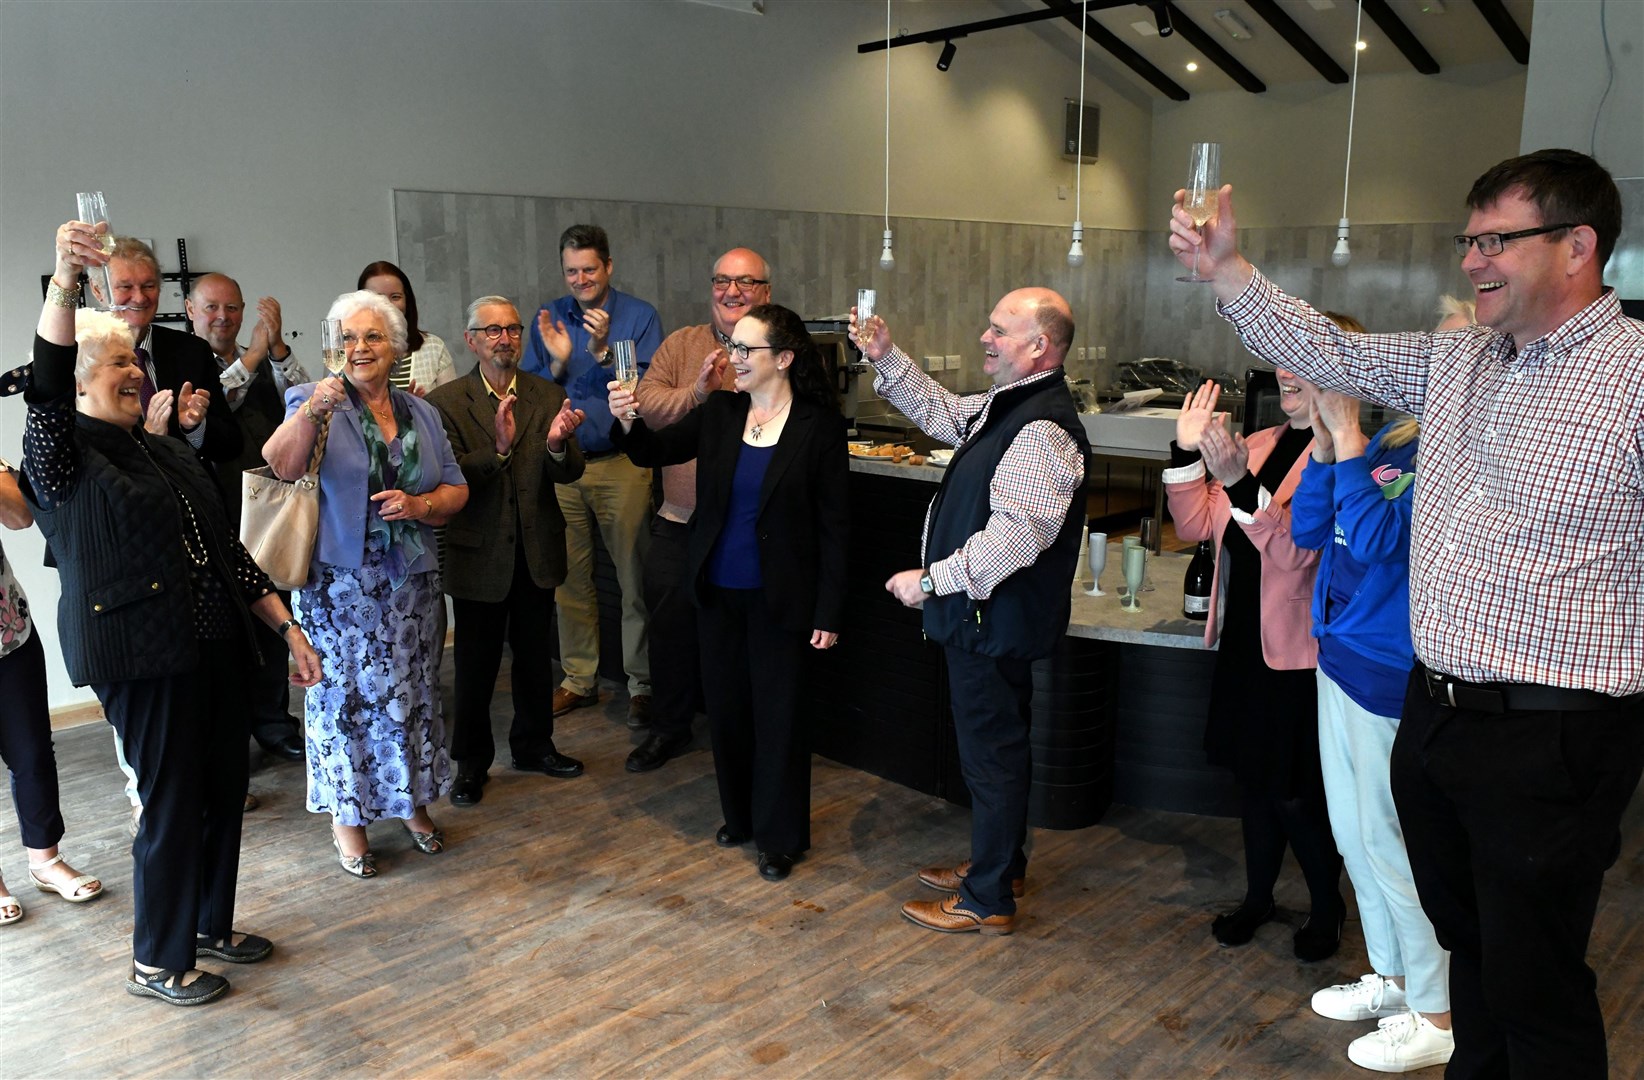 Celebrations in the community cafe area. Picture: James Mackenzie.